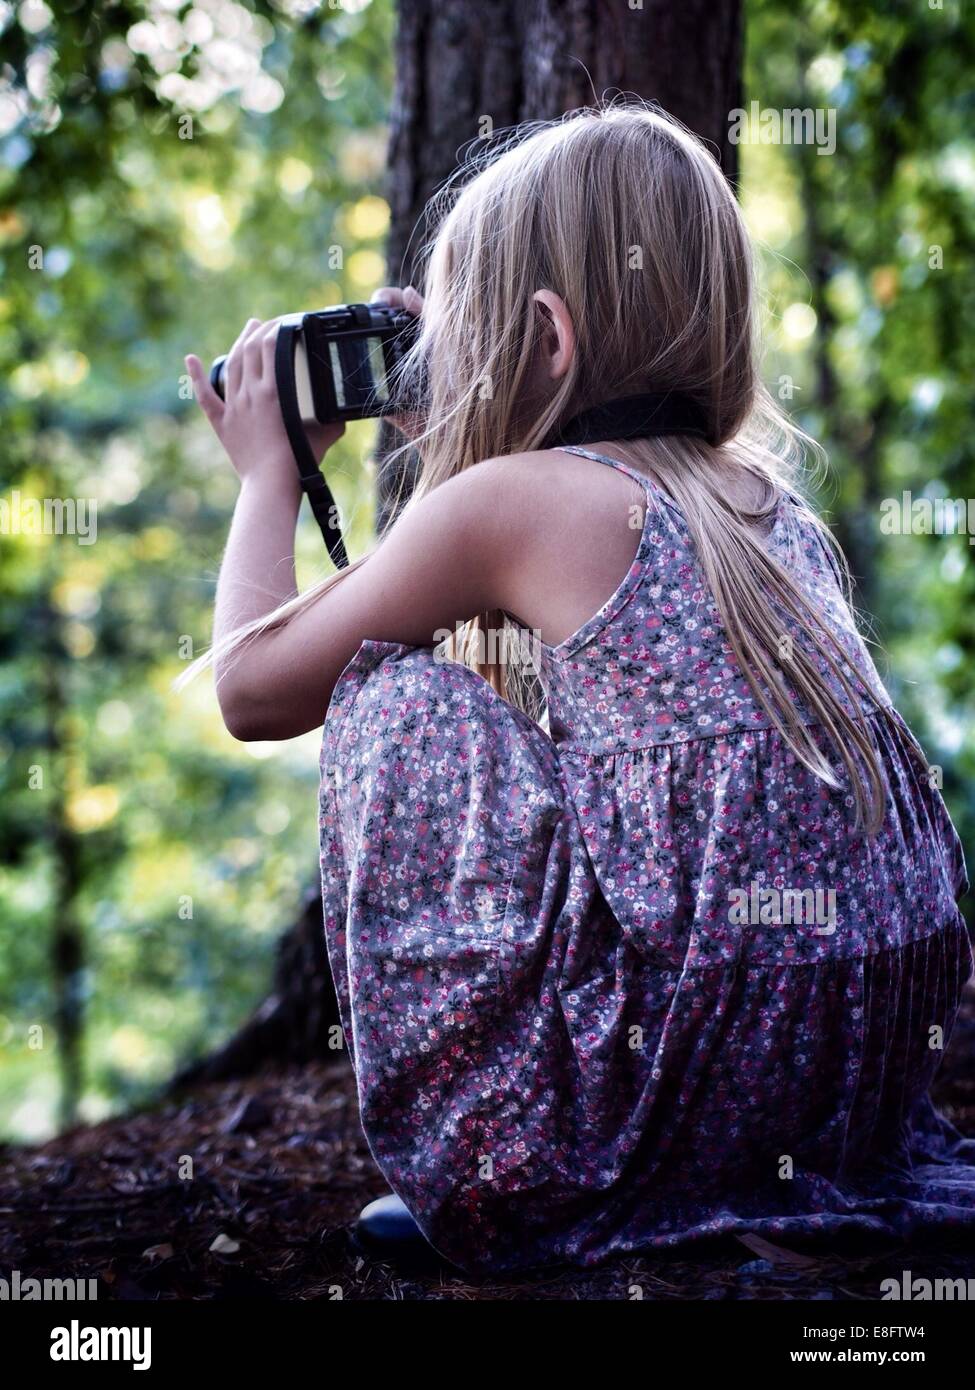 Girl crouching in the forest looking through binoculars, Sweden Stock Photo